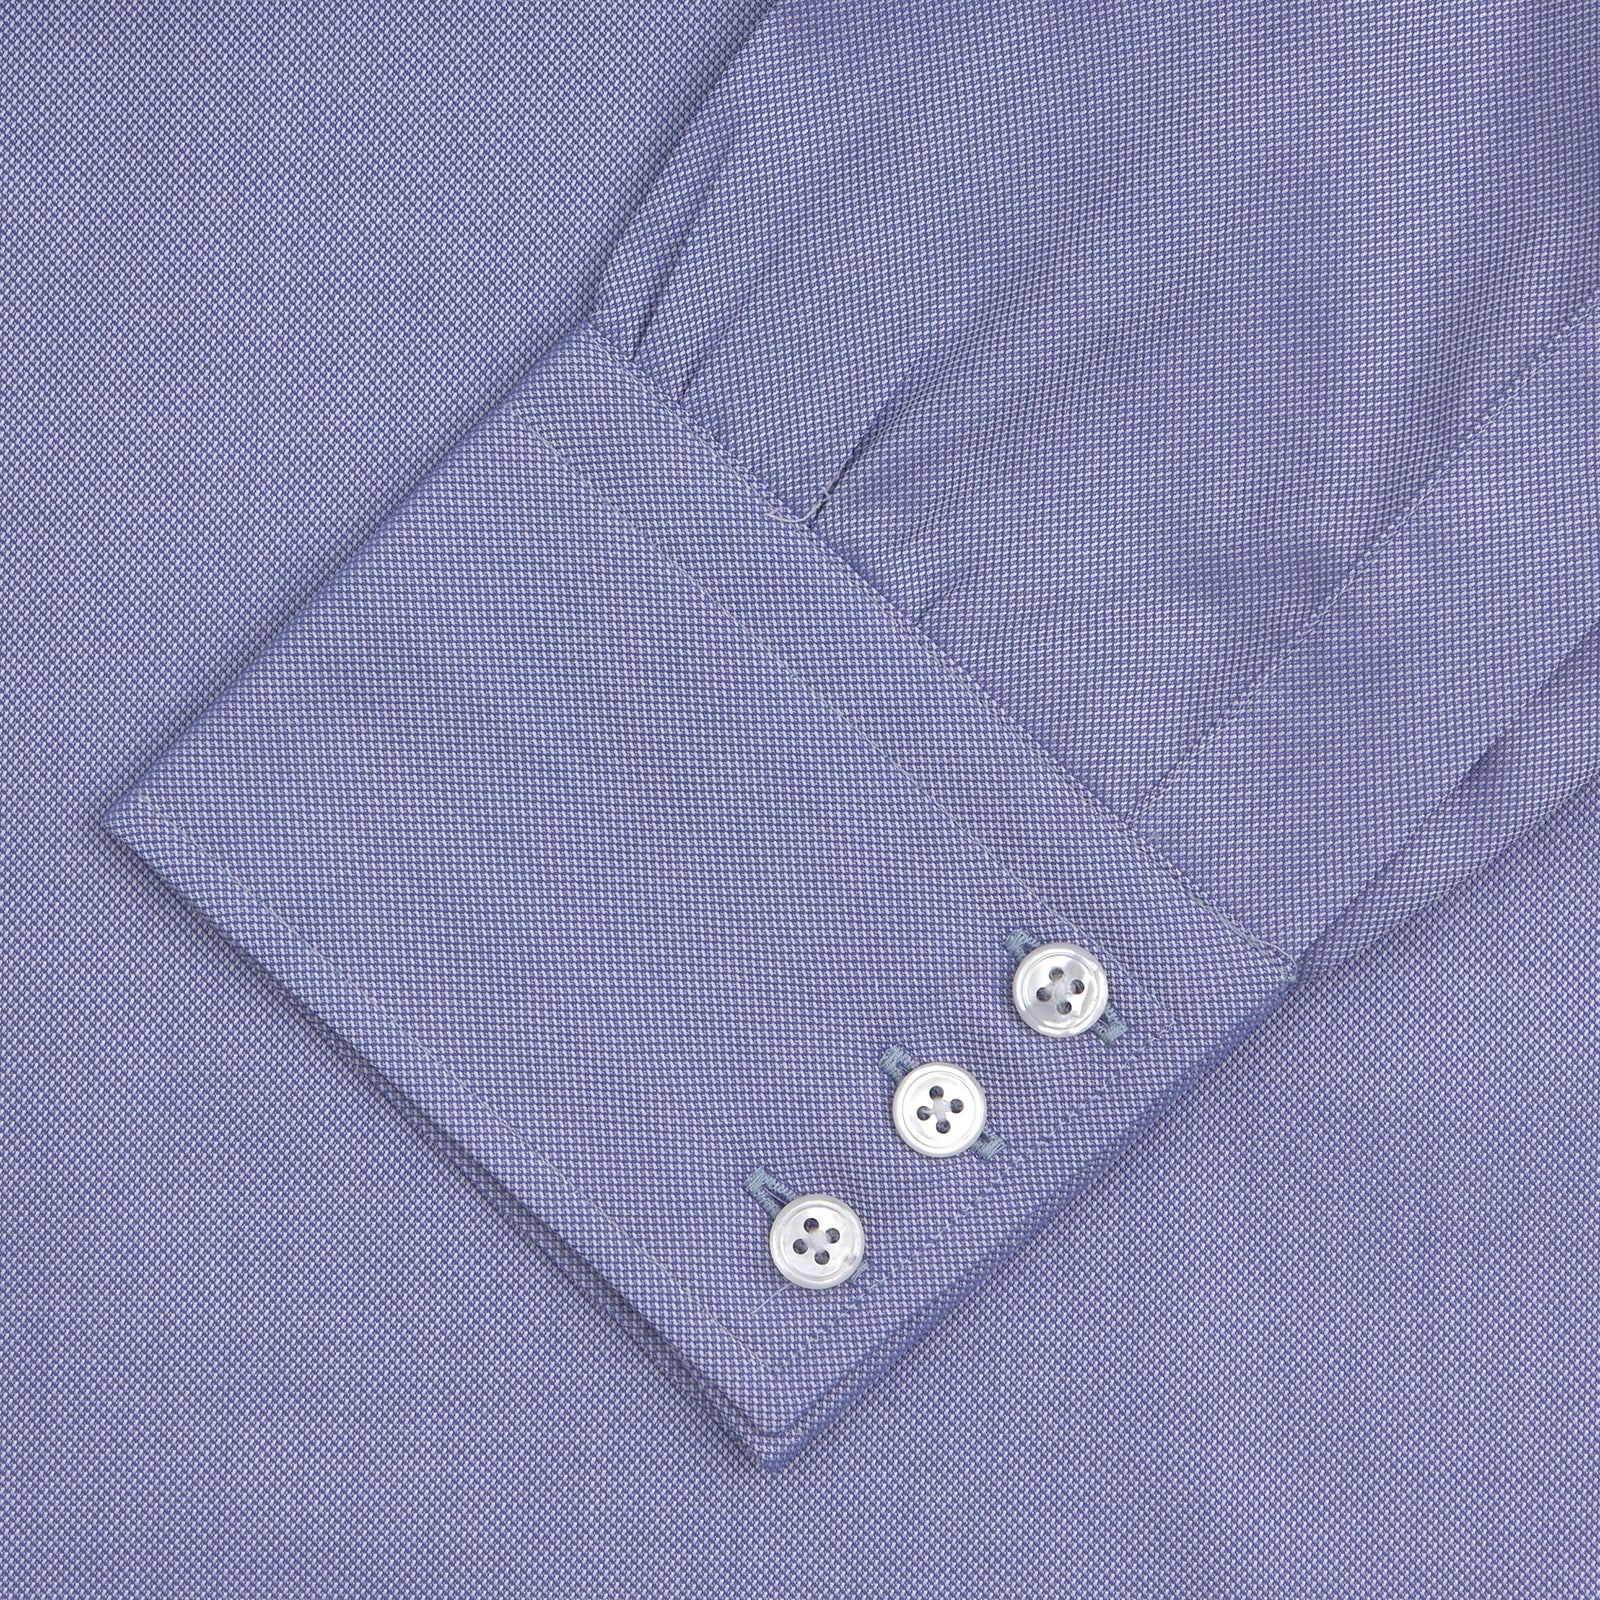 Blue Superfine Oxford Cotton Shirt with T&A Collar and 3-Button Cuffs